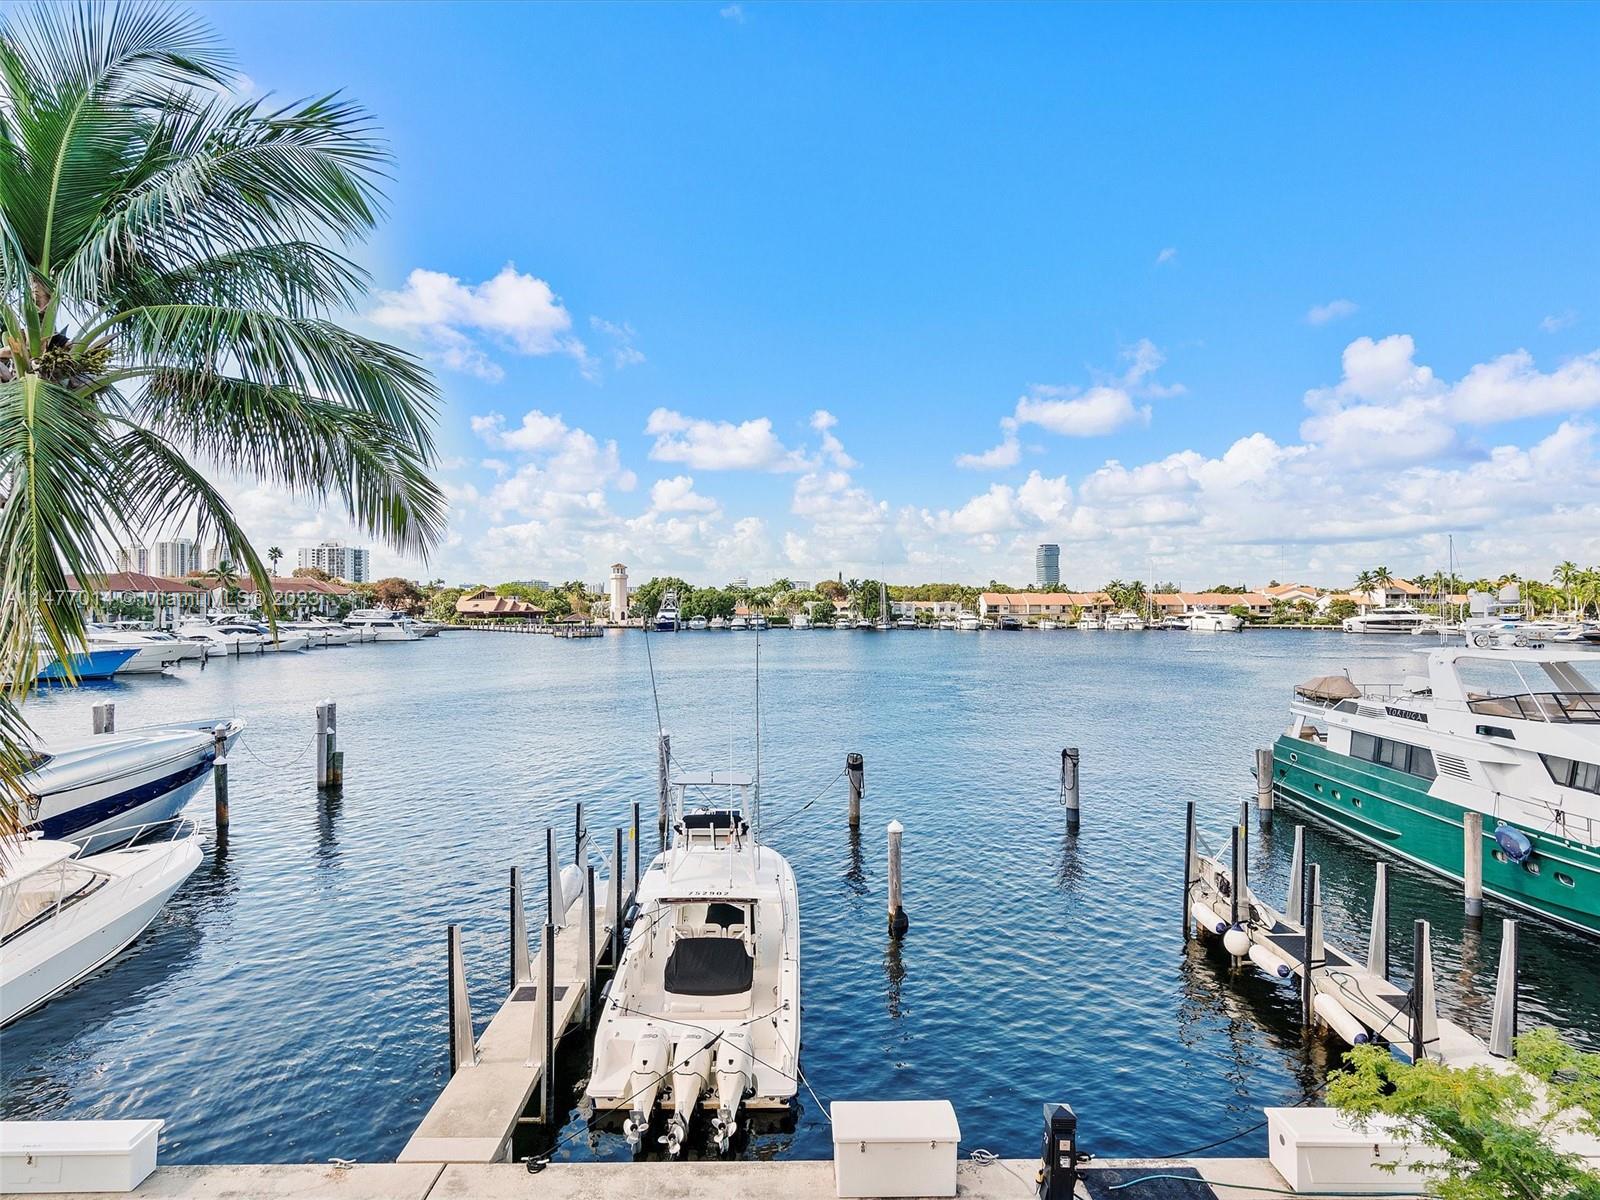 Spectacular 4 bedroom Townhome with 3100 SF of interior living space is located directly on the Waterways Marina. The views are incredible from almost every room!!  This 3 story TH is fully equipped with an interior elevator.  Enjoy all that South Florida has to offer in this gated Prestigious community. The floor plan offers so many options including adding additional bedrooms on the first floor.  The ground floor offers a family room, 2nd office, bar, laundry room and bathroom.  On the second floor is the open kitchen and living room and formal dining area. On the third floor there is the master bedroom, guest bedroom and extra room, can be a bedroom or an extra closet.  This residence has been freshly painted.  This is the largest residence available in the community and will go quickly